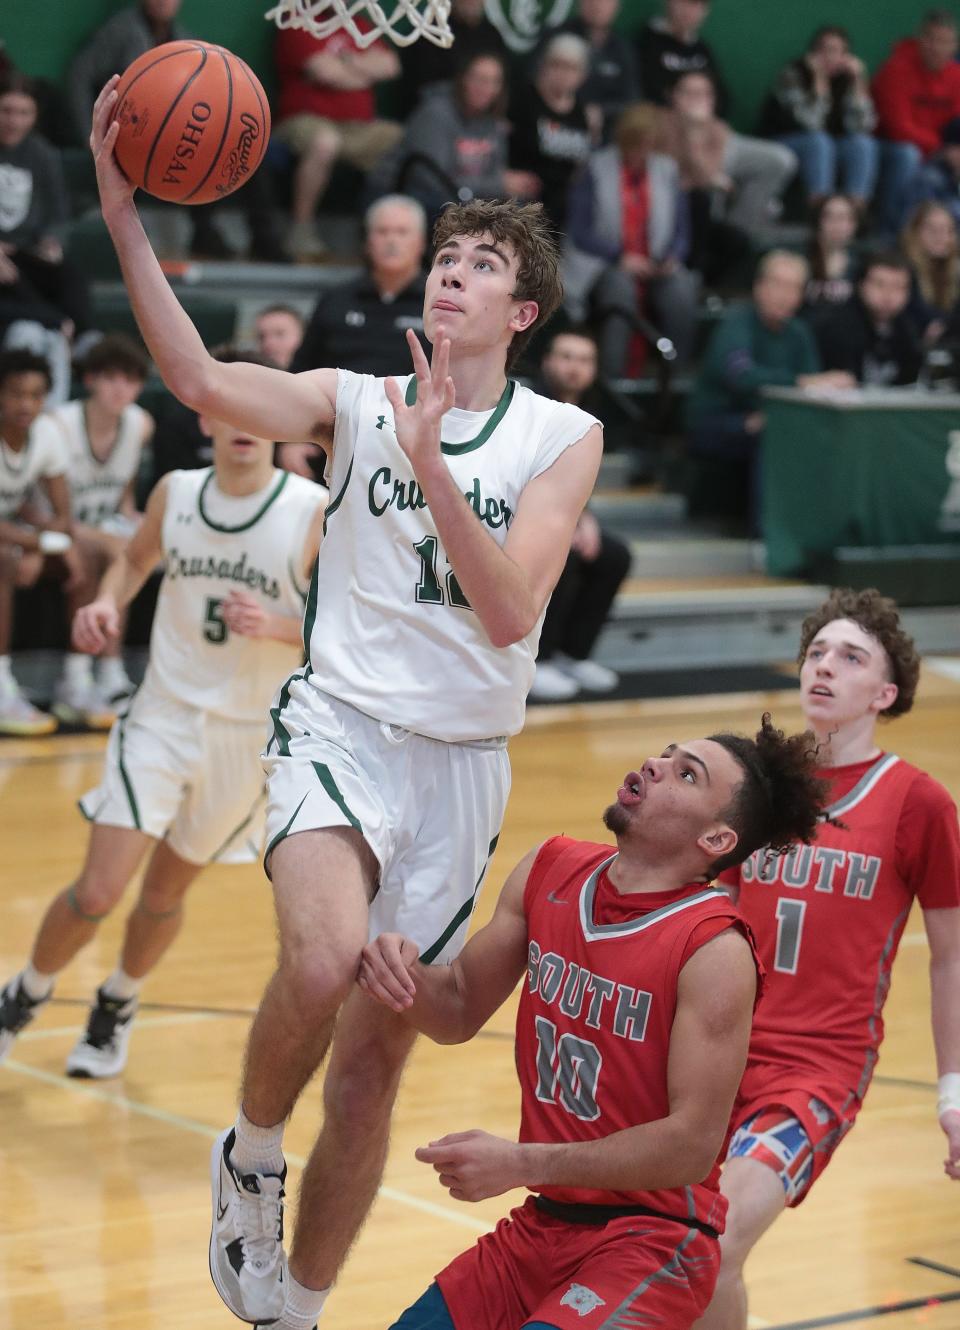 Central Catholic's Dylan Rouse drives for a layup vs. Canton South, Tuesday, Dec. 13, 2022.